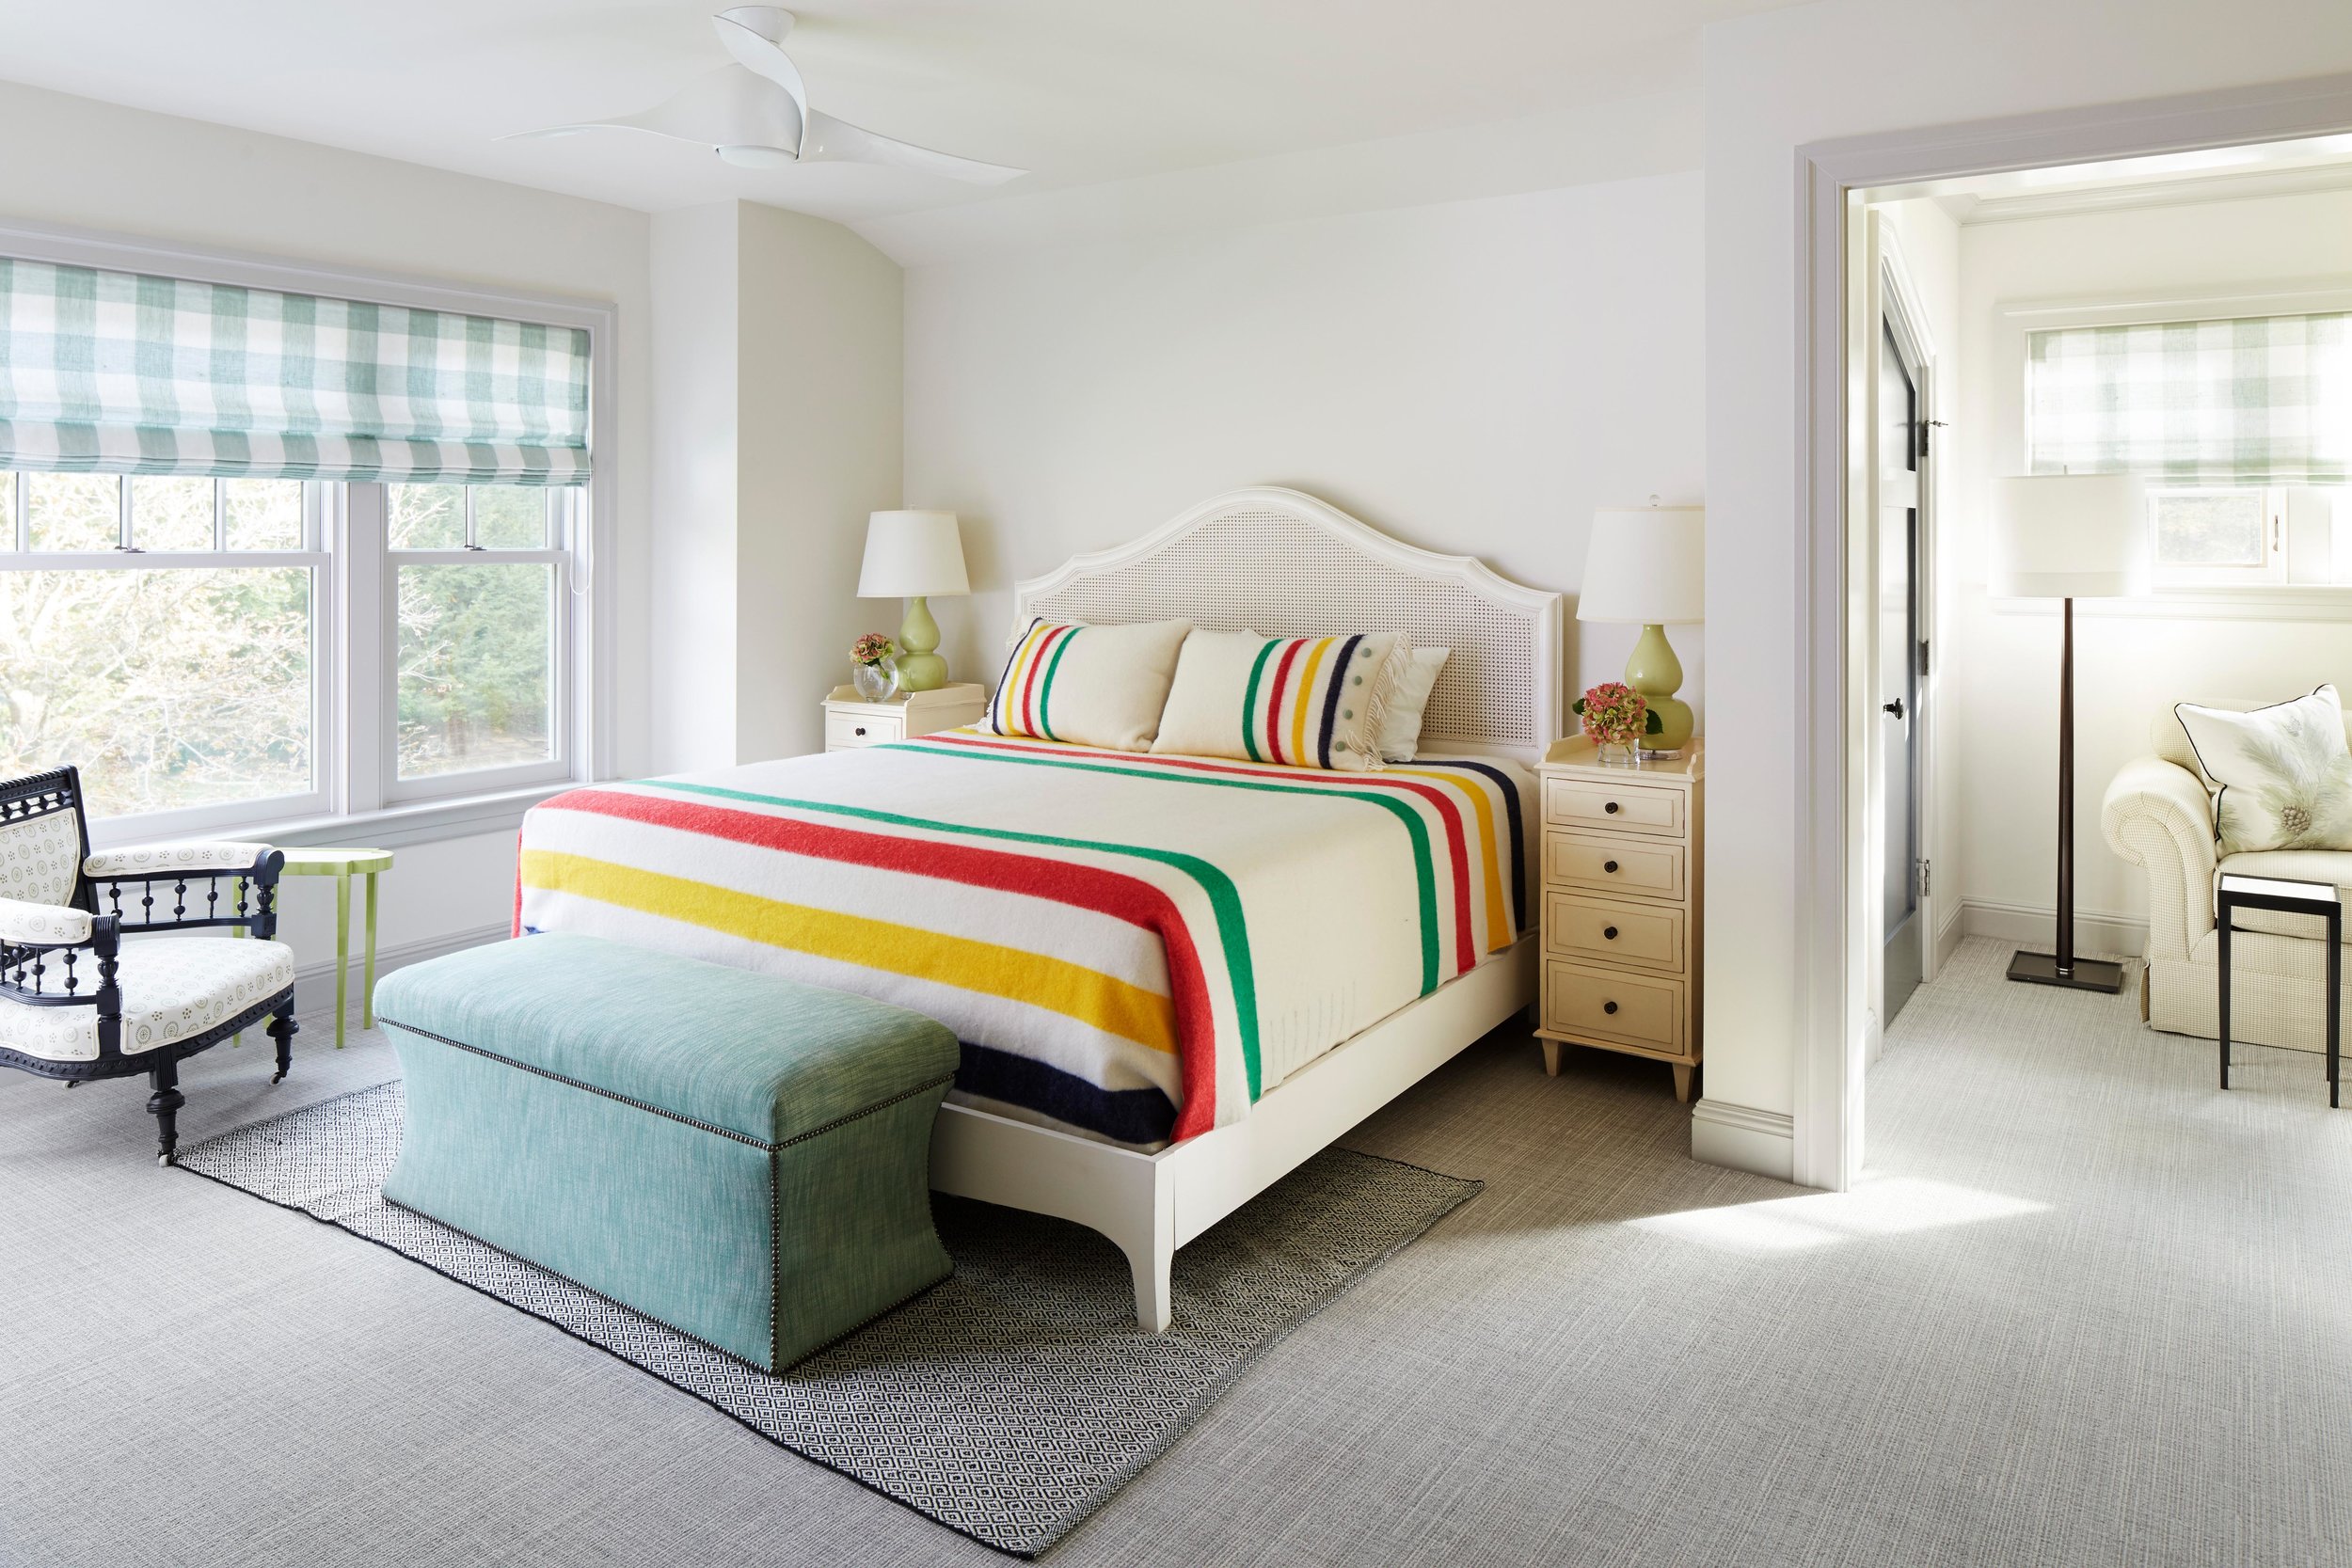 Camp blankets inspired this guest bedroom. Come see more interior design inspiration from Elizabeth Drake. Photo by Werner Straube. #interiordesign #classicdesign #traditionaldecor #housetour #elizabethdrake